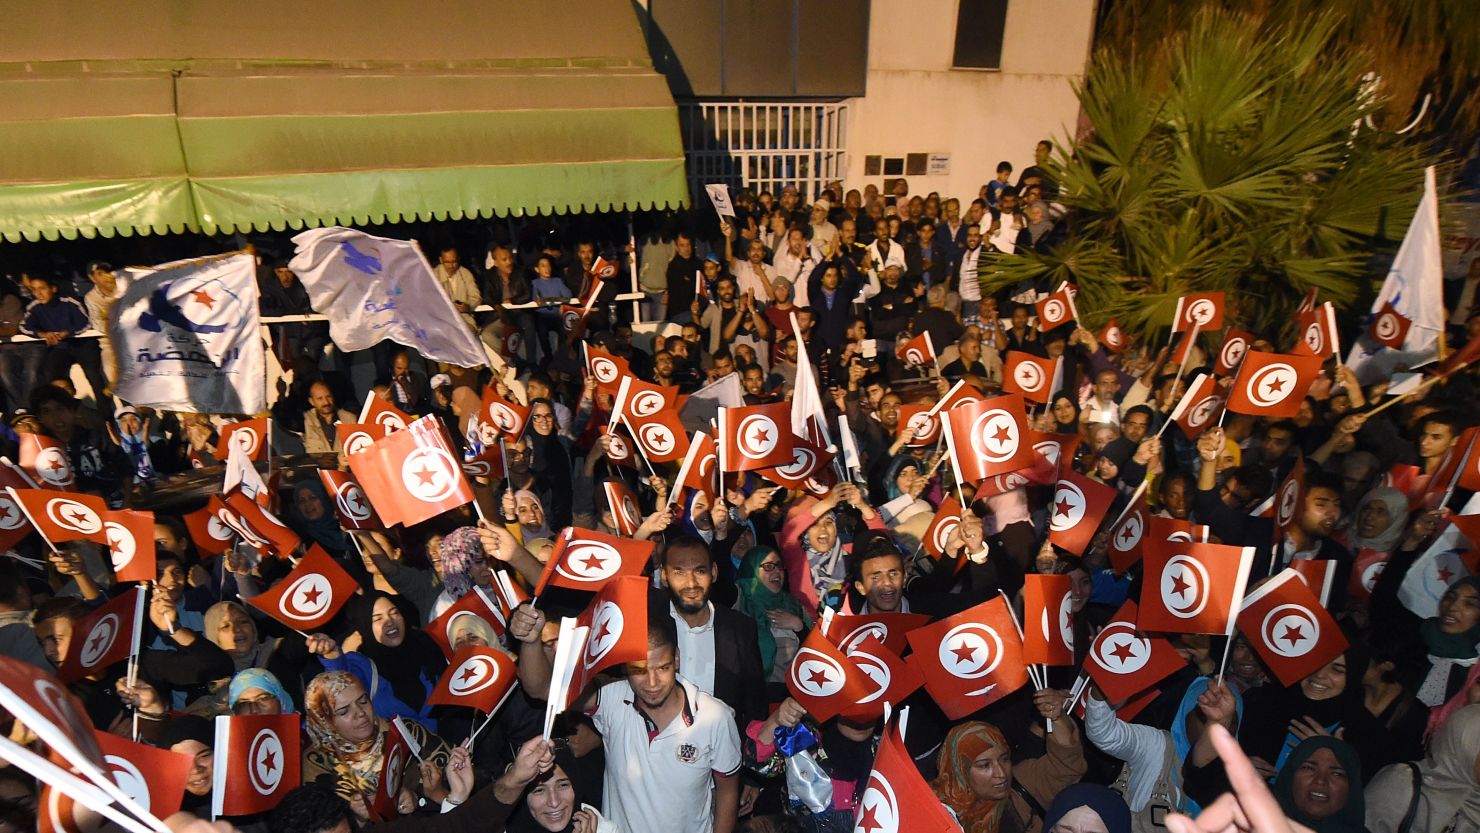 Tunisia's election process began in October with a vote for parliament. 